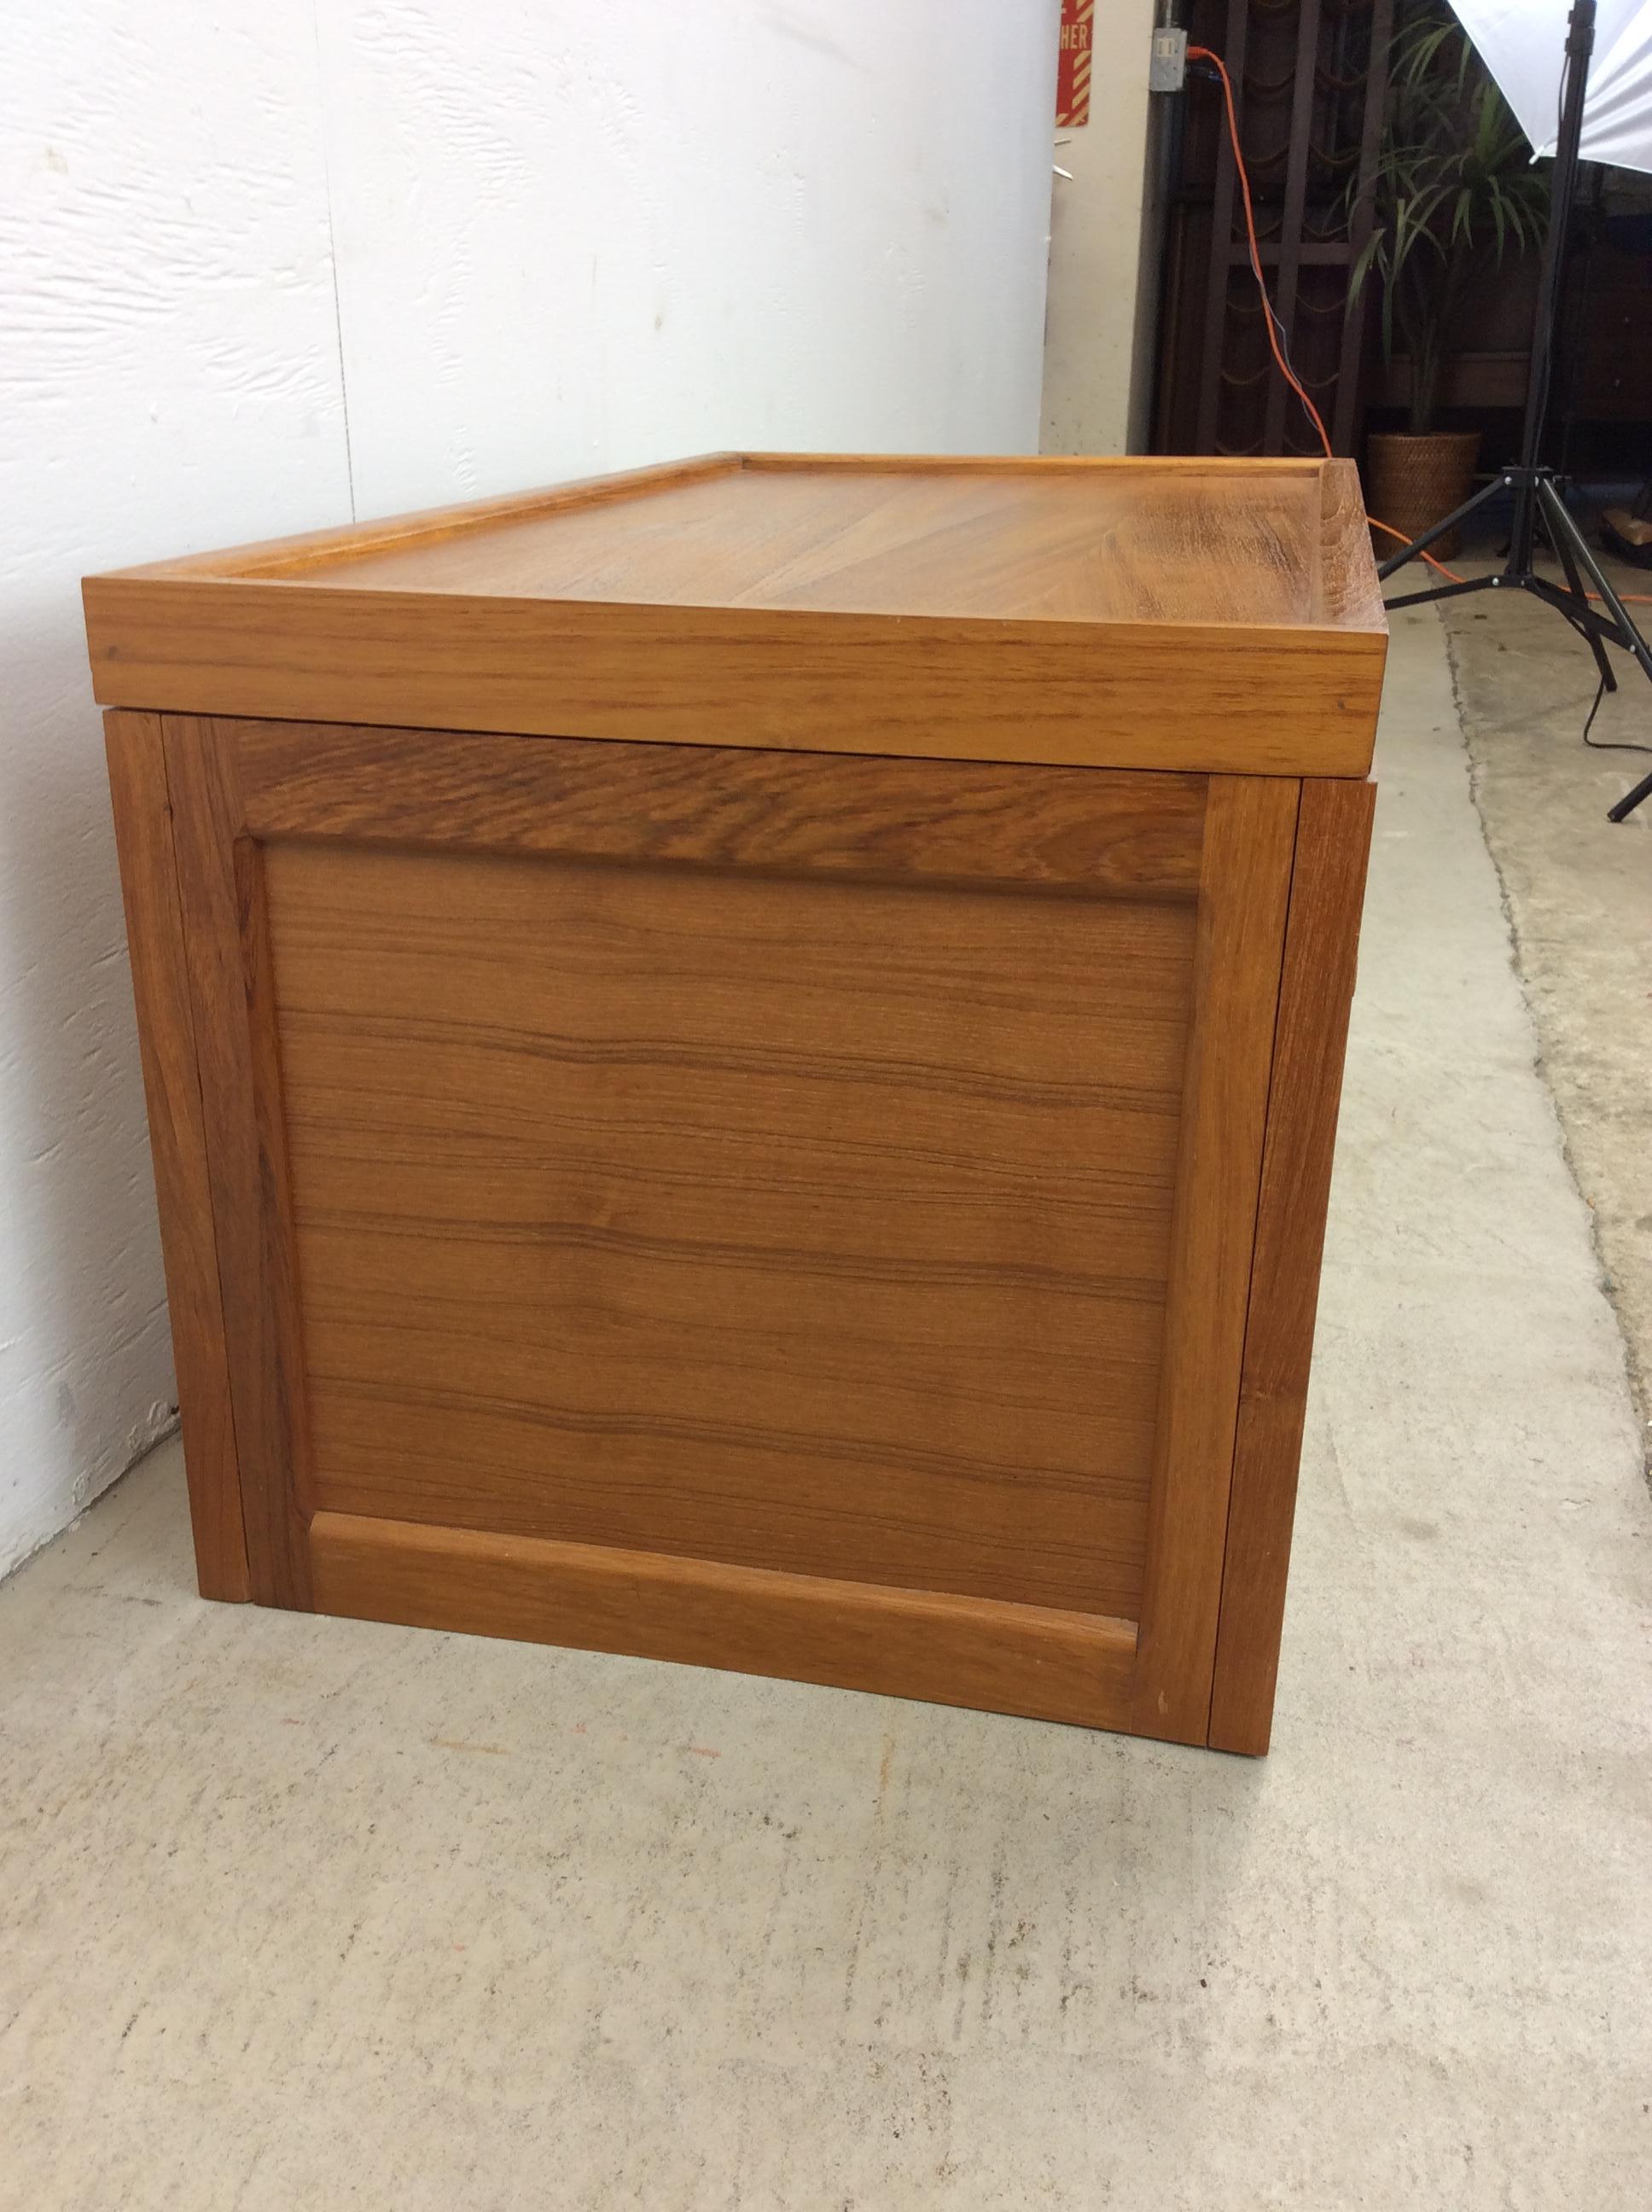 Scandinavian Modern Teak Blanket Trunk Chest In Excellent Condition For Sale In Freehold, NJ